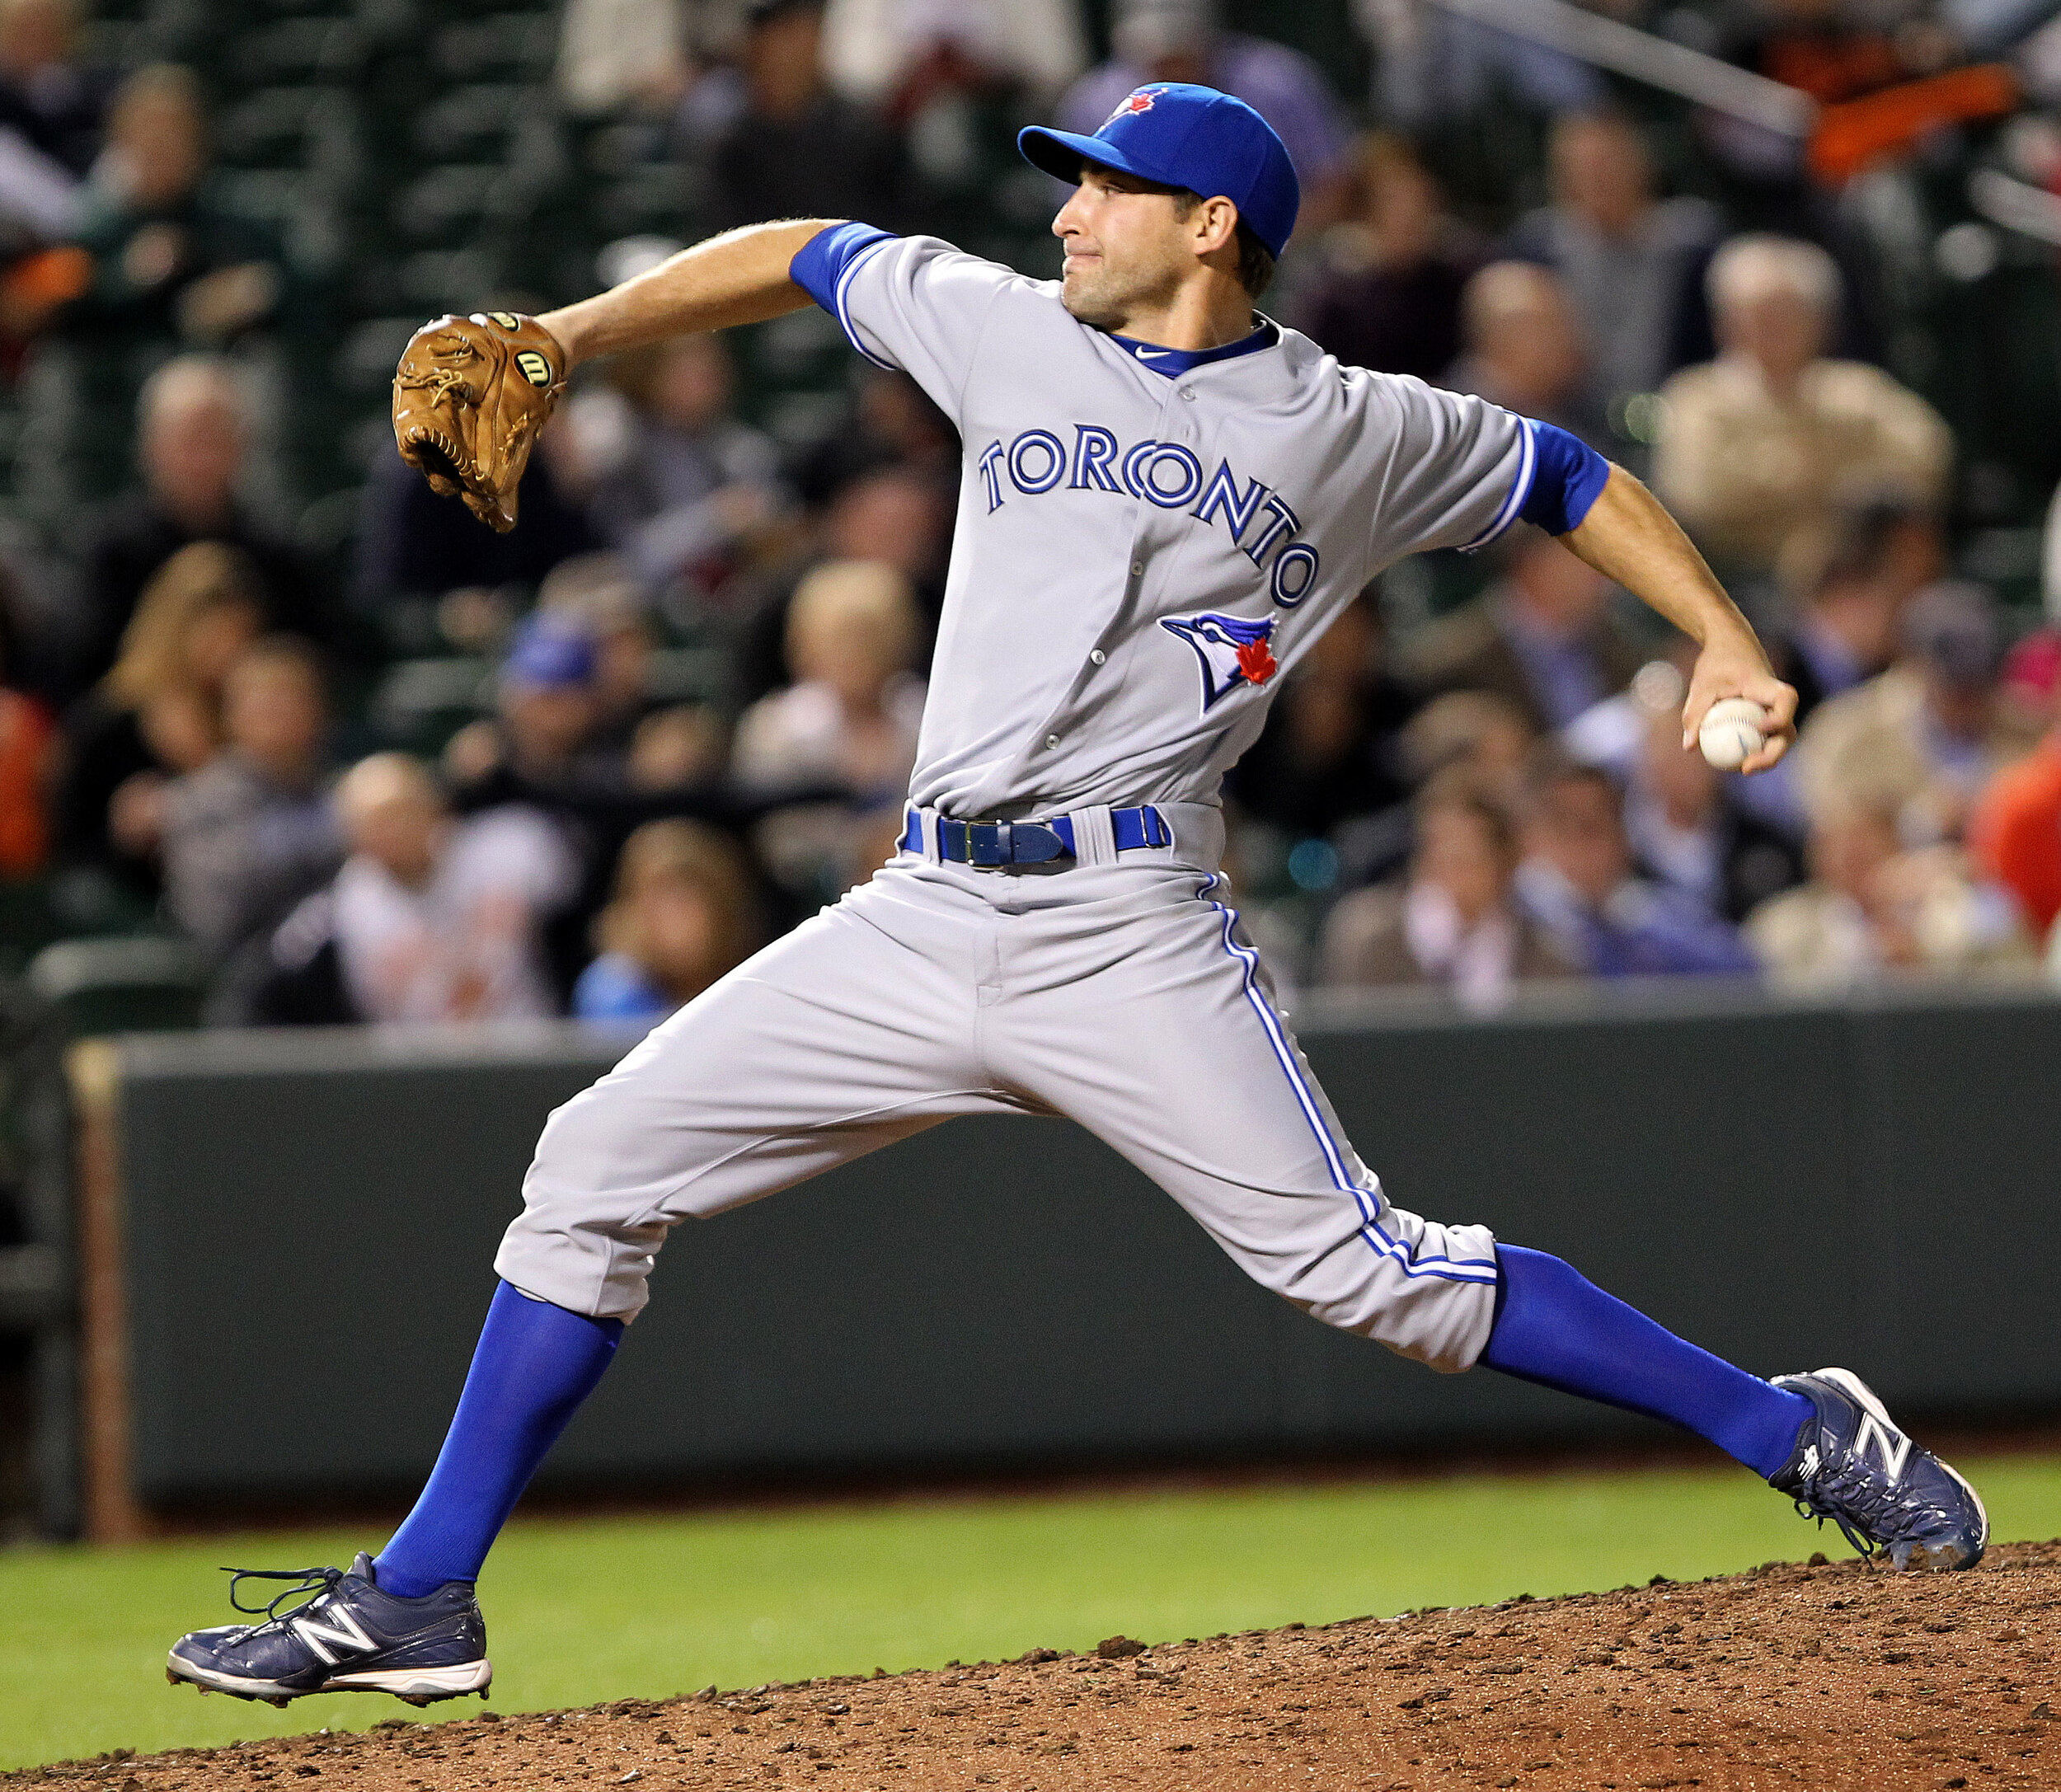 Evan as a pitcher with the Toronto Blue Jays in 2012